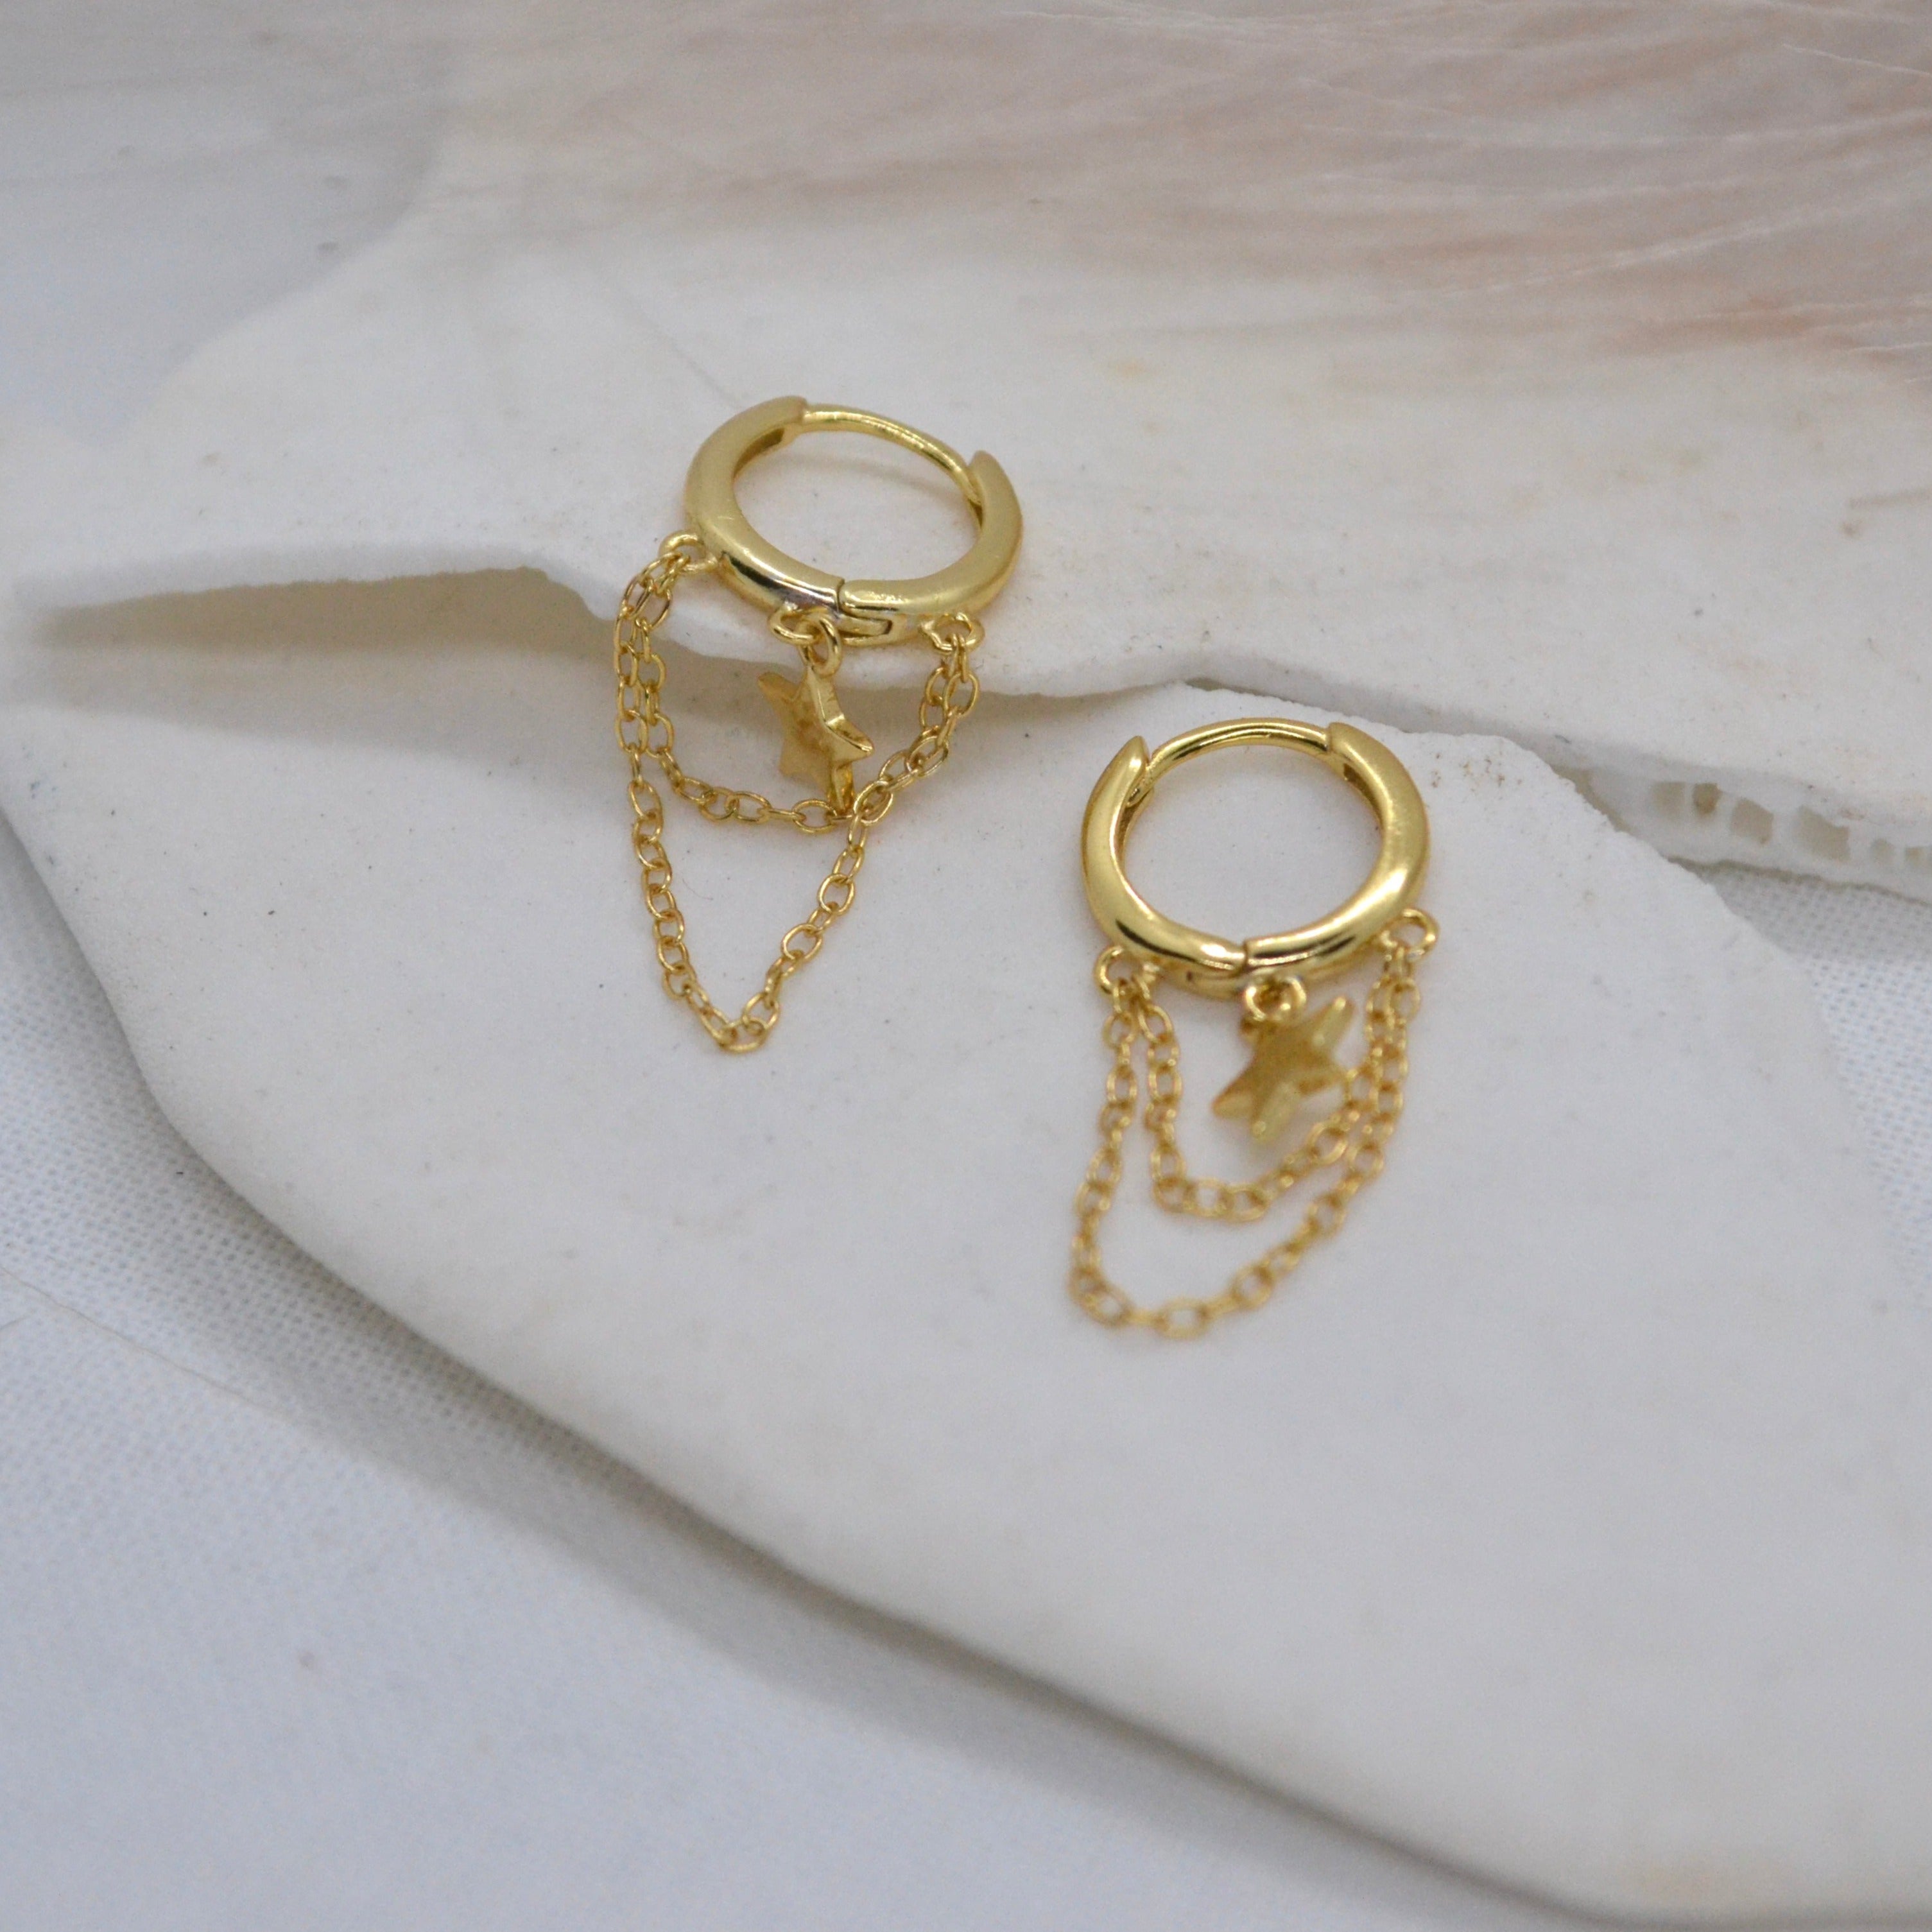 Loren | Charm Sterling Silver Gold Hoops - Boheme Life Collection